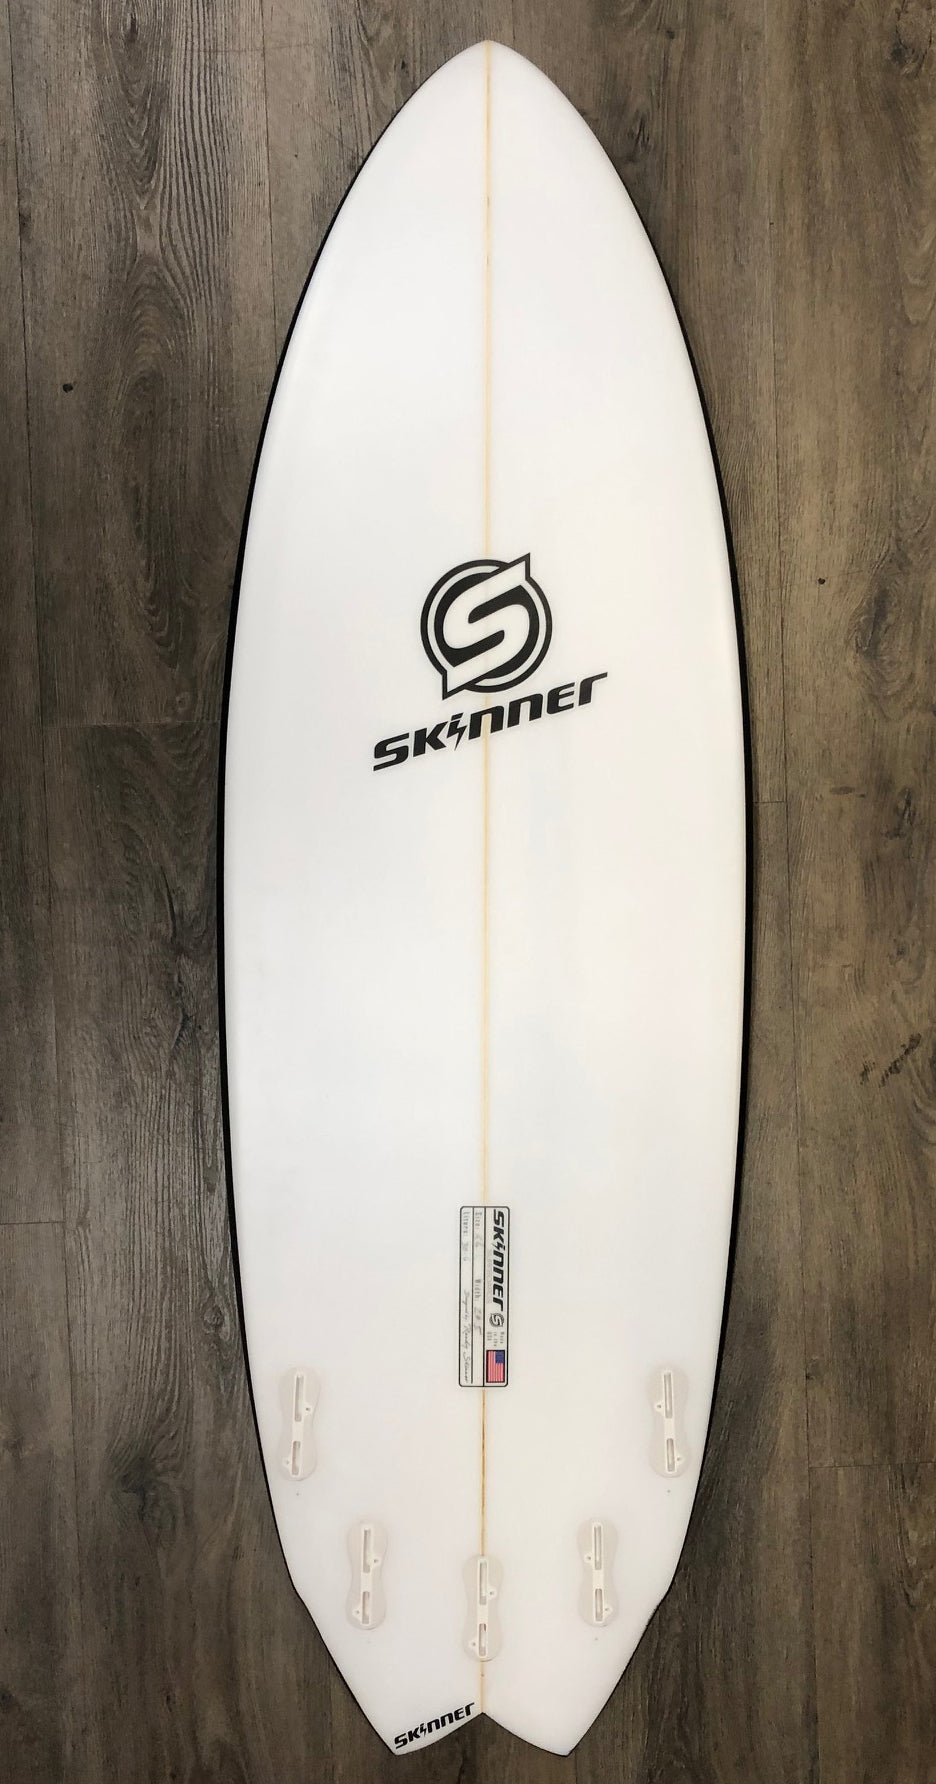 SOLD Skinner Surfboards RS5 Fish 5'6 x 19 7/8" x 30.6L 5 FCS2 Plugs Surfboard